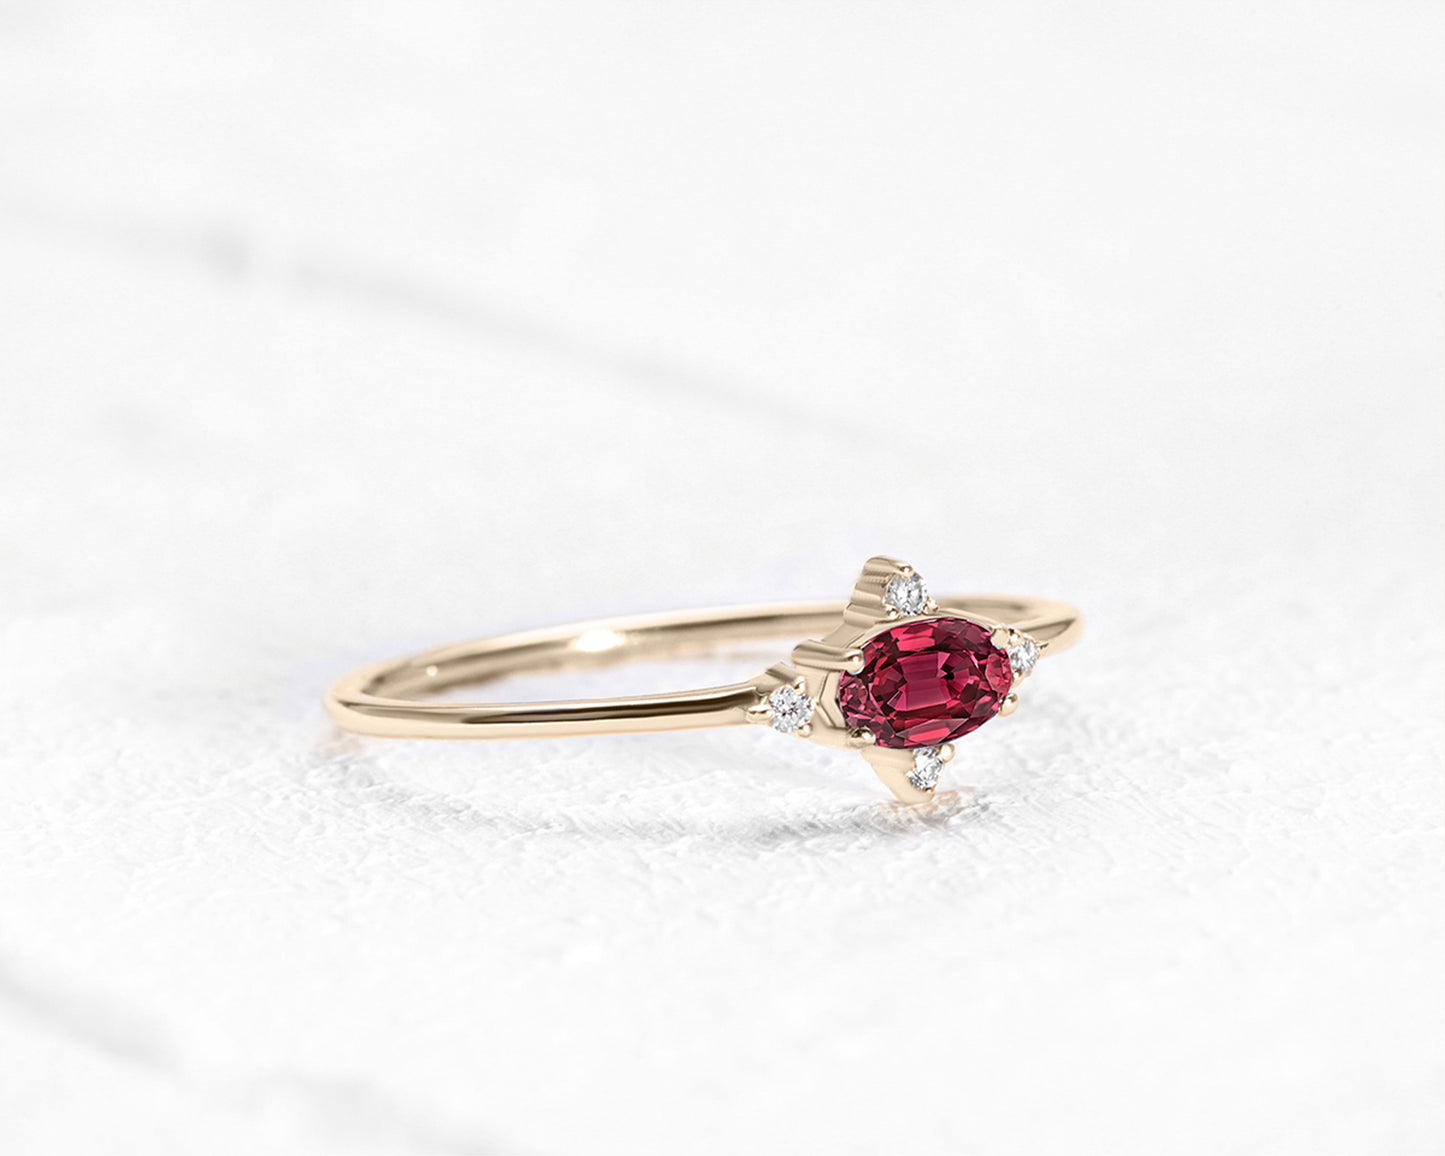 Halo Setting Oval cut Ruby with Diamond Ring in 14K Yellow Solid Gold,Straight Shank Engagement Ring